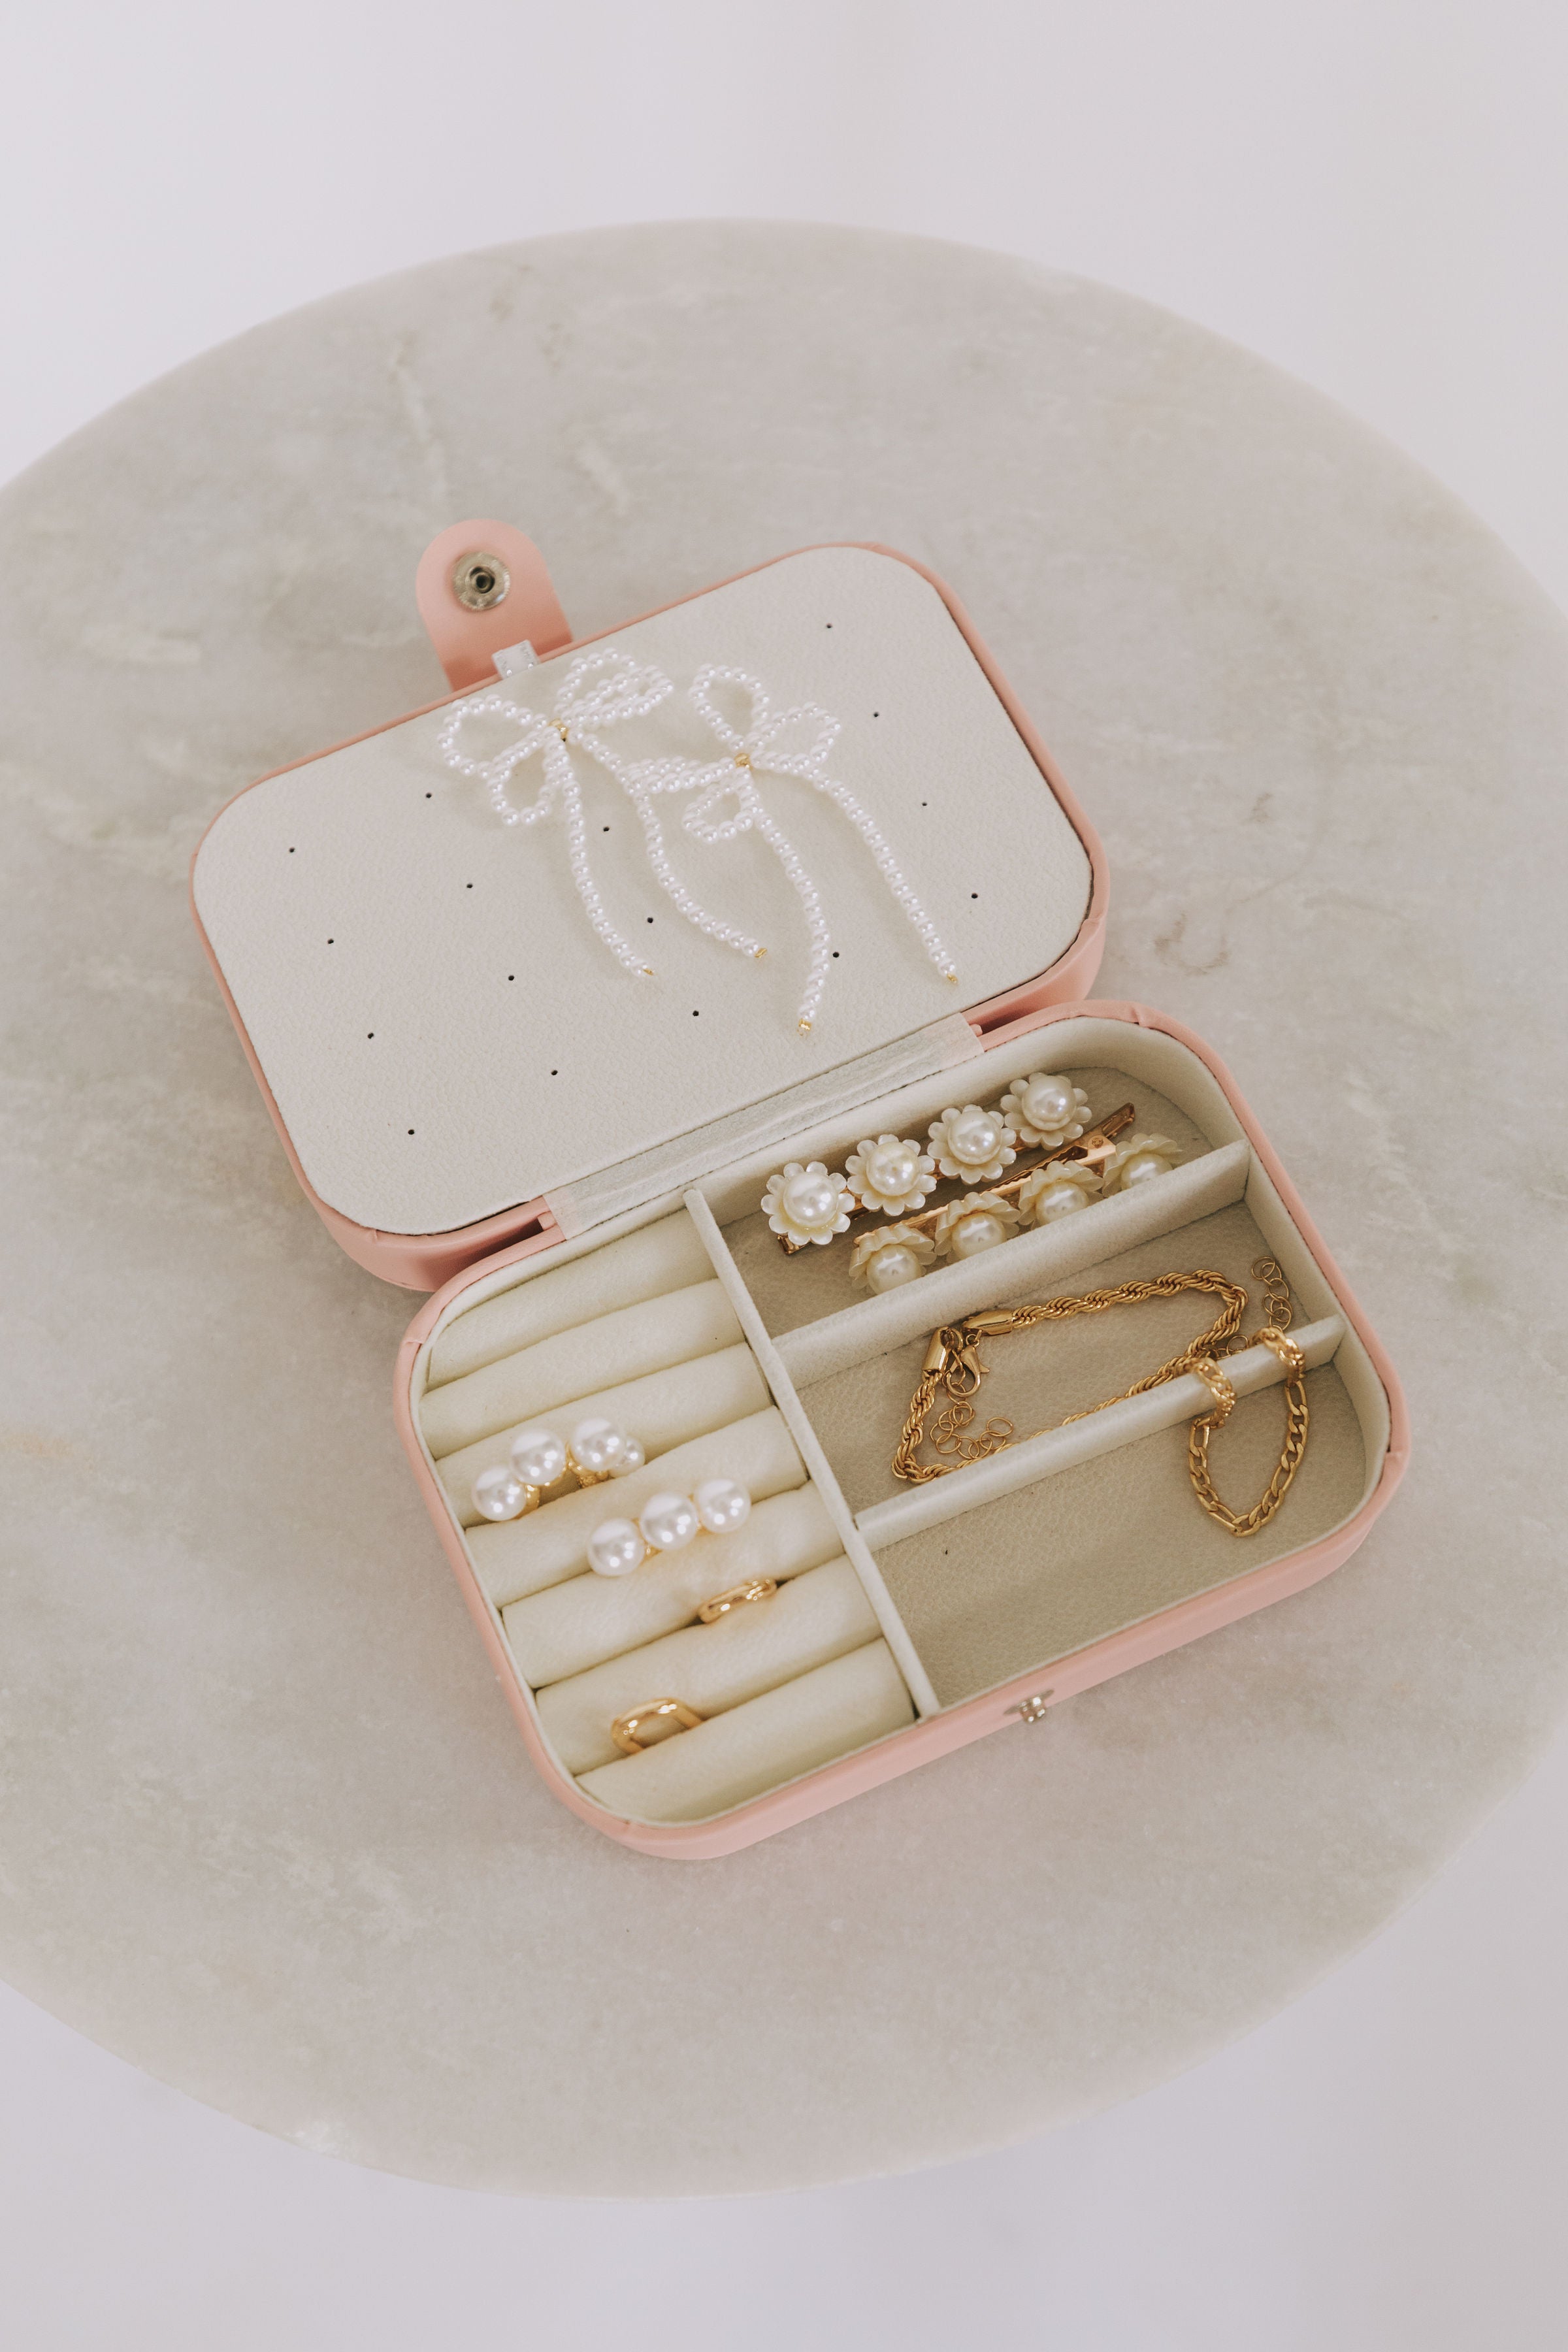 Big Picture Travel Jewelry Case